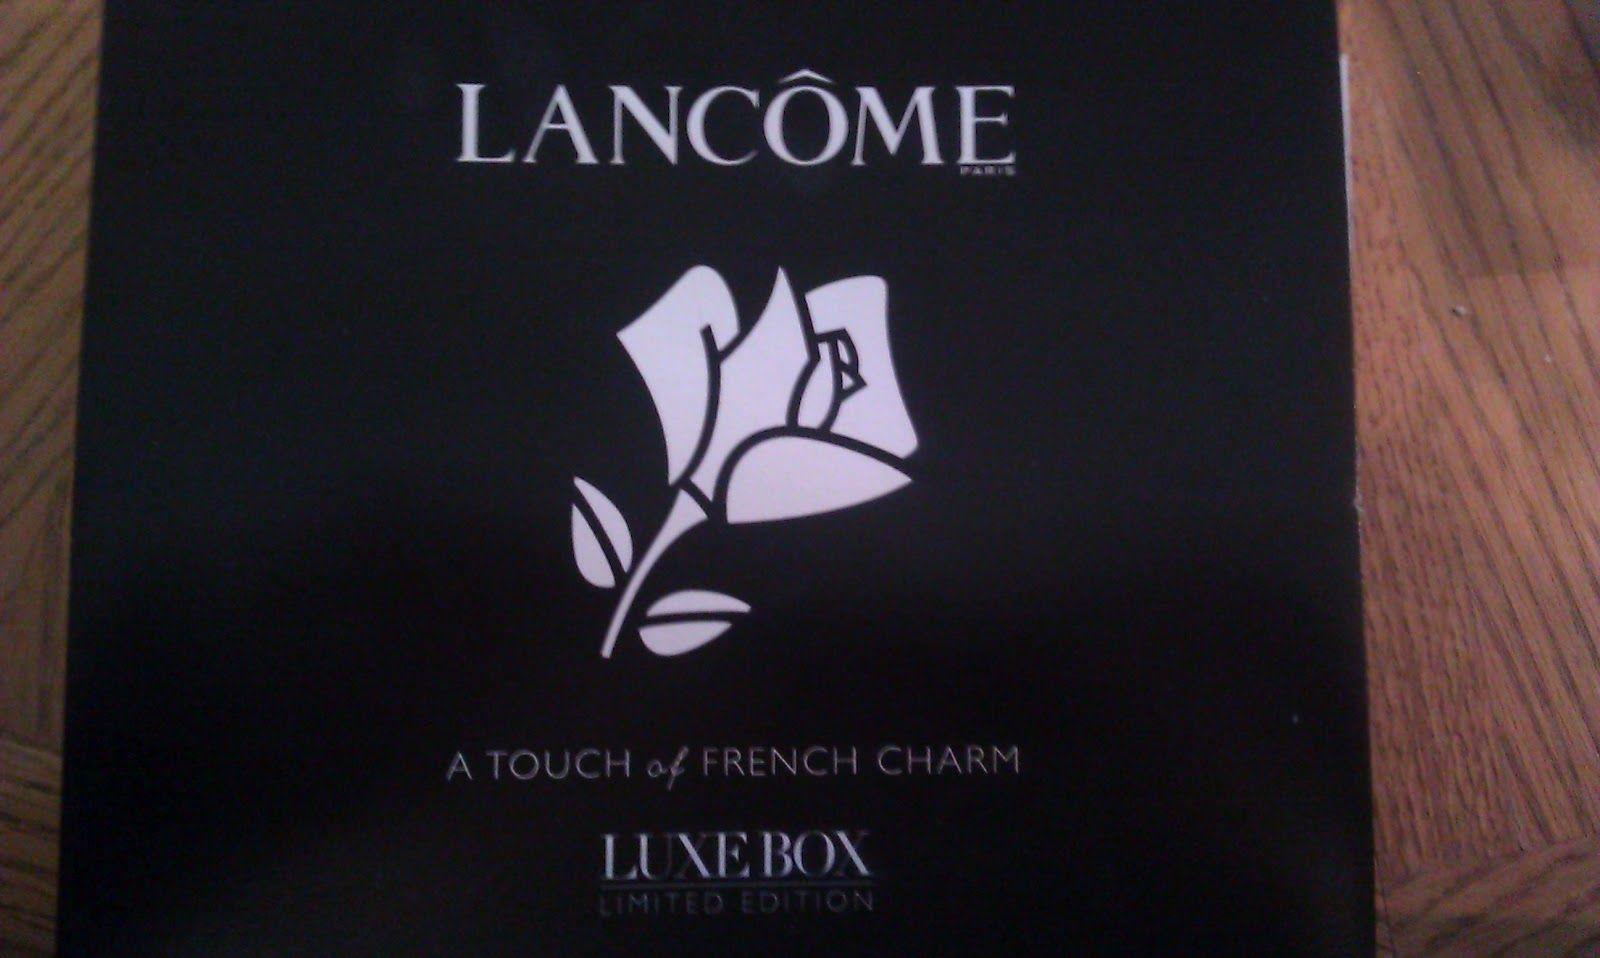 Lancome Flower Logo - Crazed and Caffeinated Beauty: Lancome Luxe Box